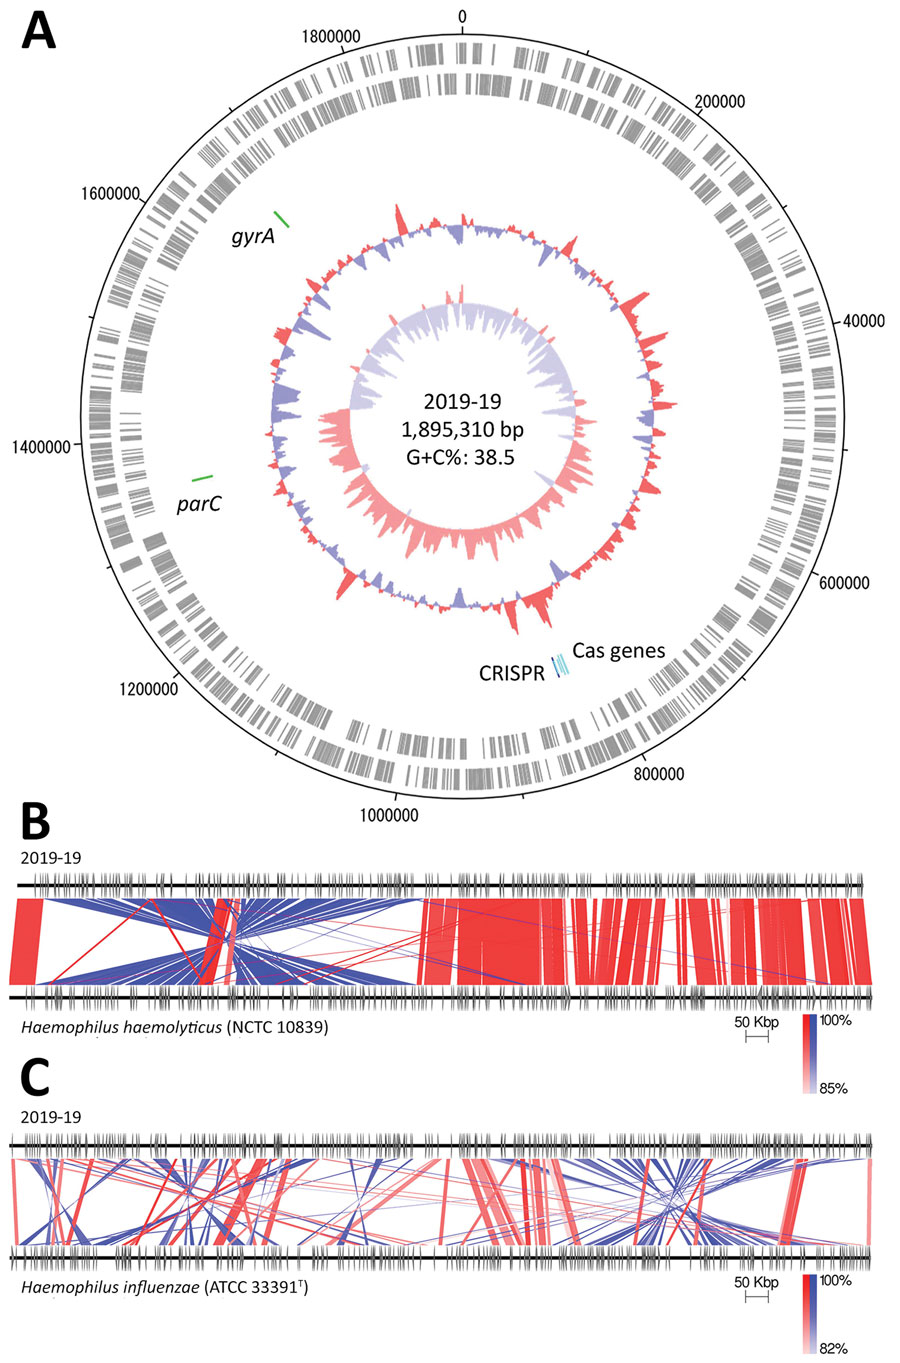 Genomic analysis of Haemophilus haemolyticus strain 2019-19 from a 9-year-old girl in Japan. A) Circular map of the whole-genome sequence. The outermost circle shows the number of nucleotides, the second circle shows coding sequences on the plus strand, and the third circle shows coding sequences on the minus strand. The innermost circle represents the G+C skew (%) and second innermost circle, G+C content (%); green zones show the locations of gyrA and parC, and blue and light blue zones show CRISPR-Cas–associated genes. Map drawn using Artemis DNA Plotter (Wellcome Sanger institute, Hinxton, UK). G+C, guanine + cytosine. B, C) Comparison between the whole genomes of 2019-19 and H. haemolyticus NCTC 10839 (B) and H. influenzae ATCC 33391T (C), created using Easyfig version 2.2.2 (19). Red indicates matches in the same direction; blue indicates inverted matches; white areas indicate nonmatches.